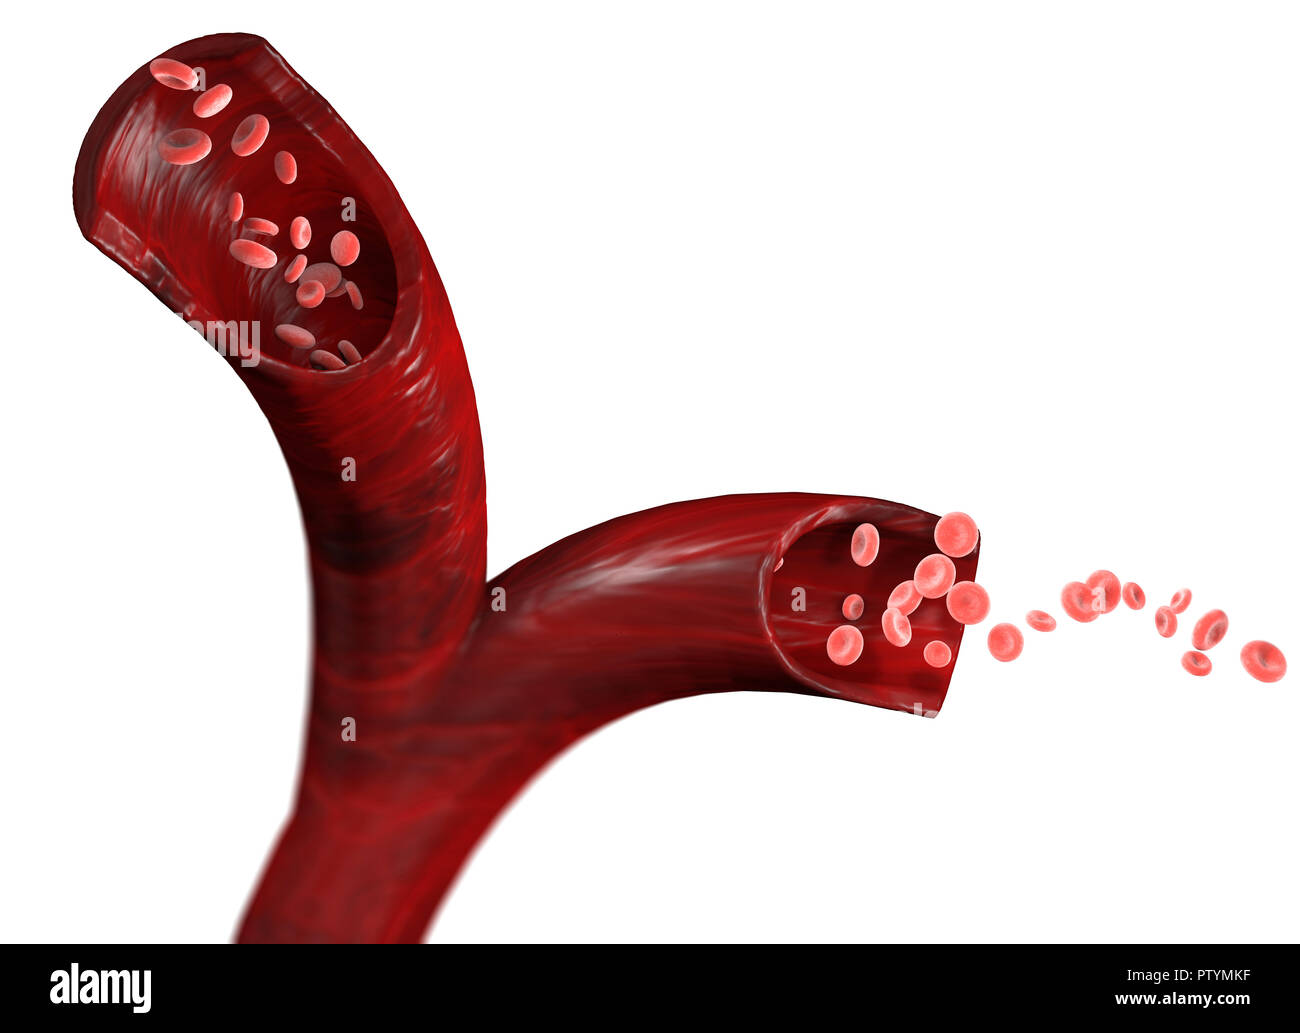 Red blood cells and blood flow through a vein, small spherical cells that contain hemoglobin, a protein that gives a red color to the blood Stock Photo